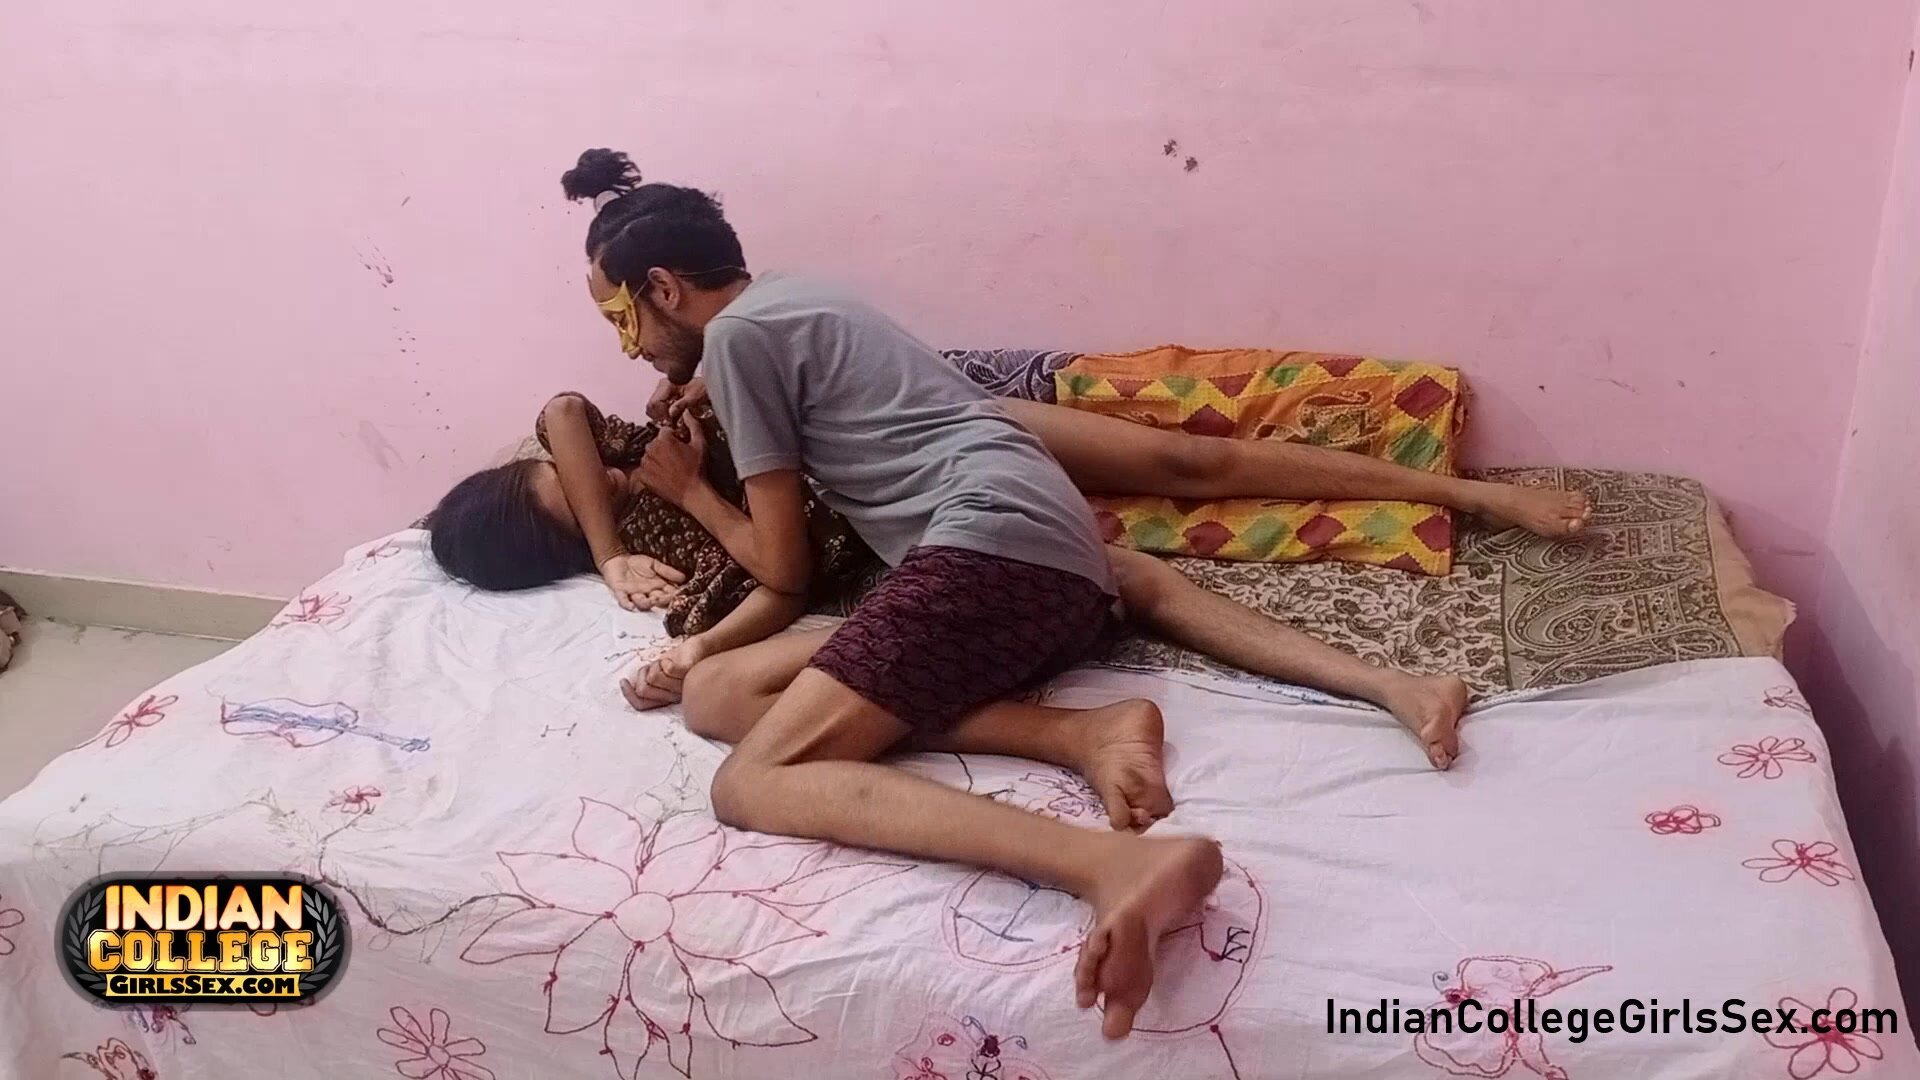 Amateur Indian skinny teen get an anal creampie after a hard desi pussy fucking sex at Fapnado image